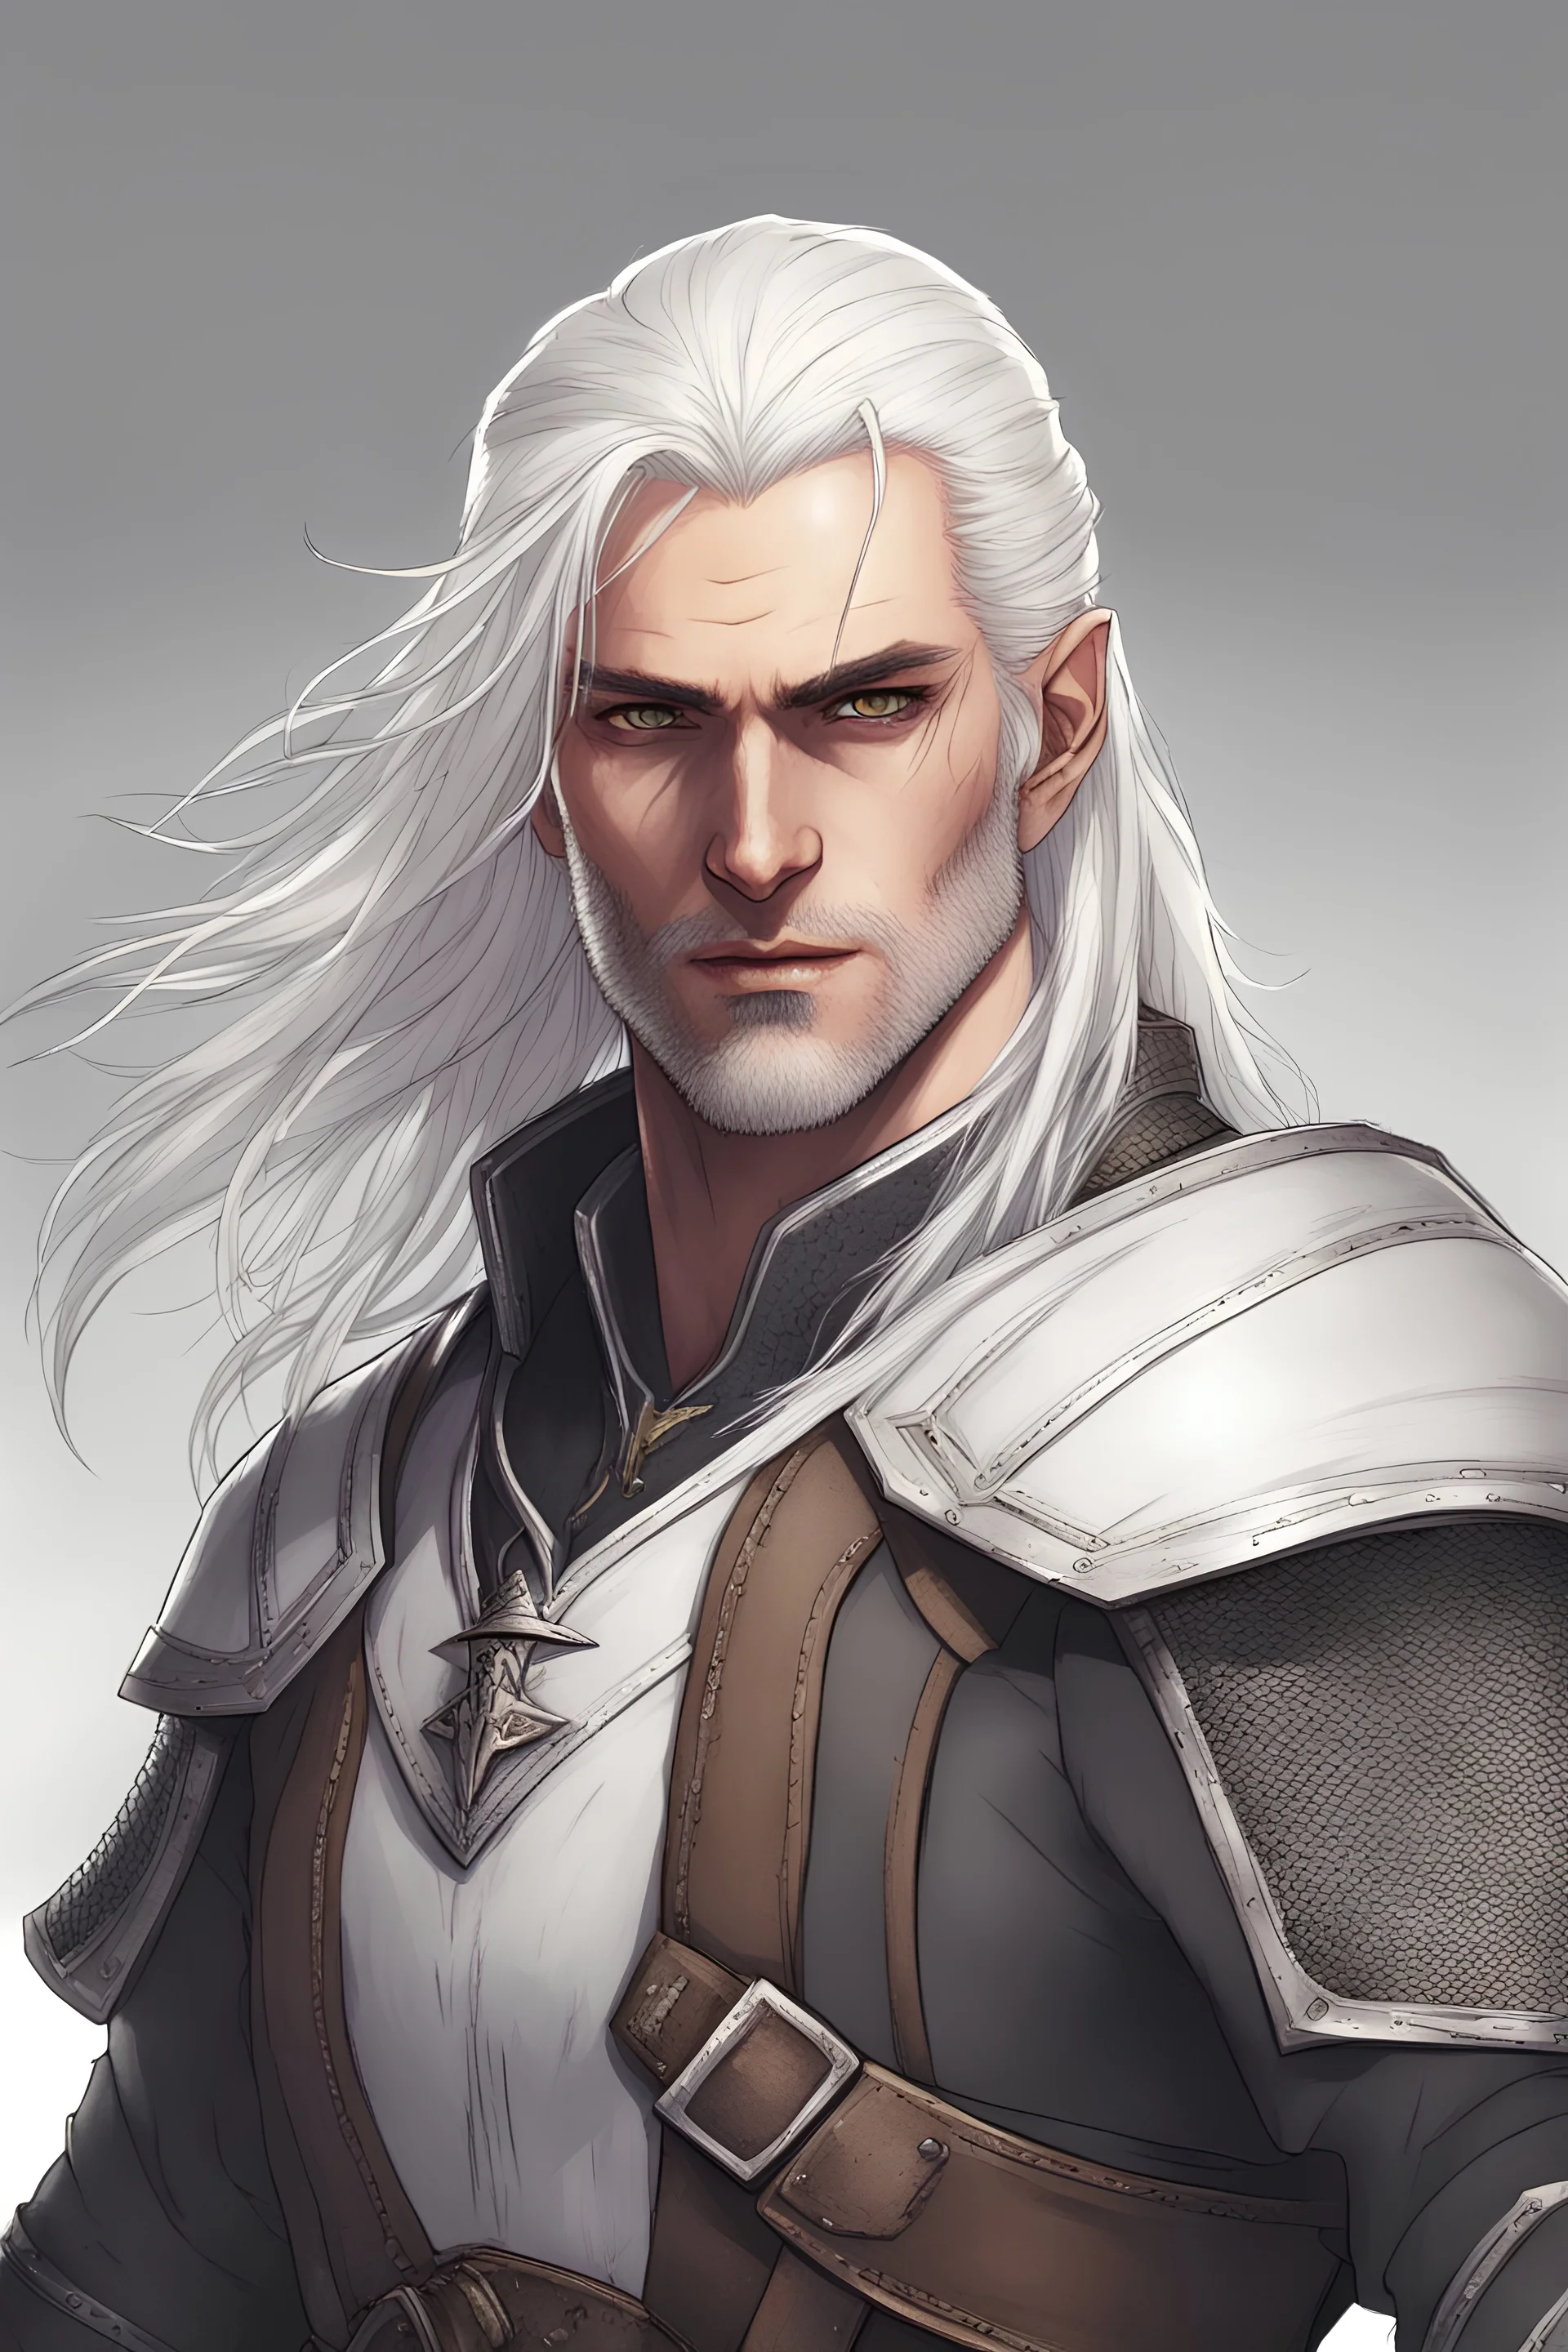 white hair, witcher, light armor, 2 swords, scars, witcher eyes, young, long hair, no beard, realistic